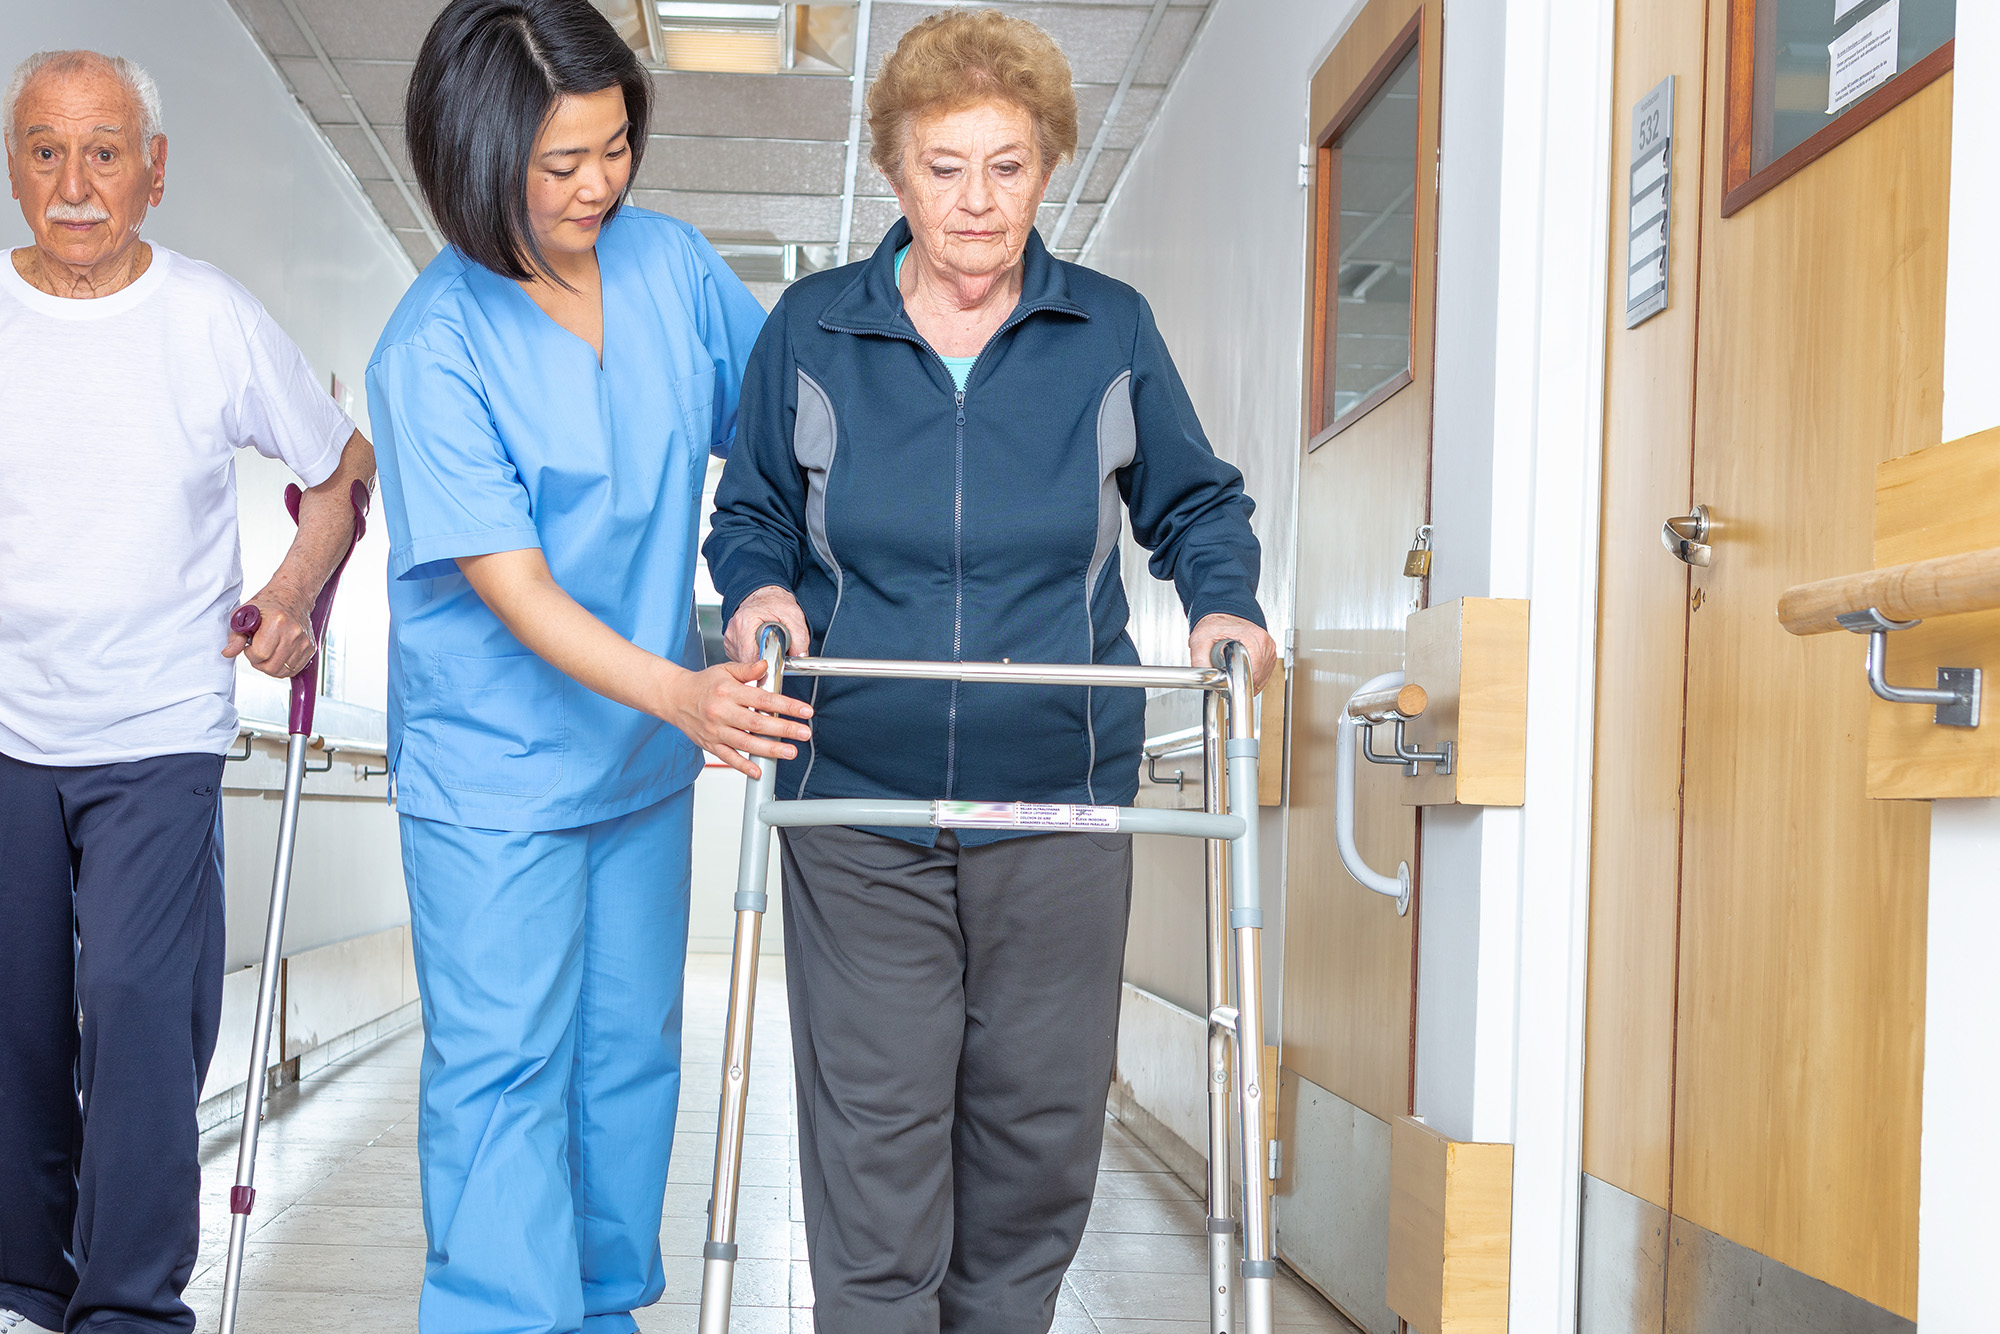 patient transfers: doctor helping elder woman with walker and man in hospital aisle.